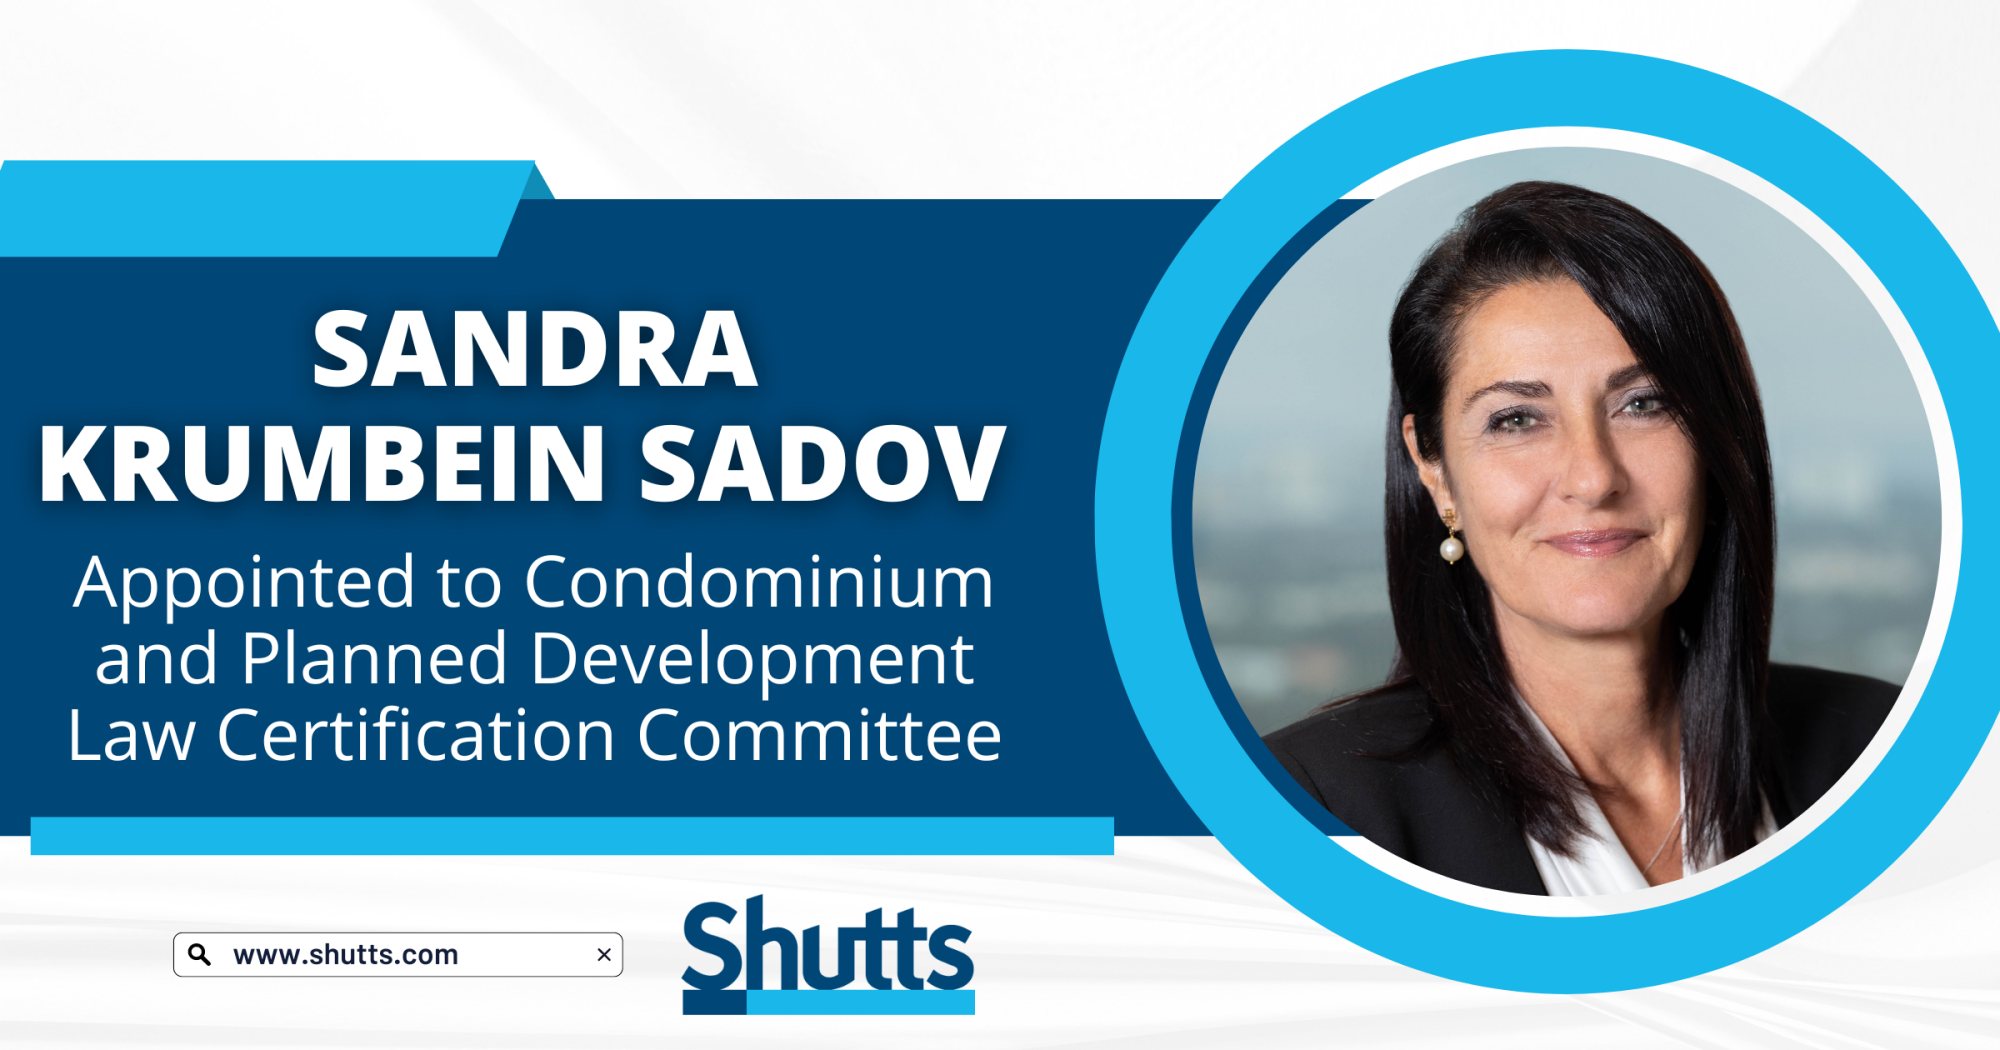 Sandra Krumbein Sadov Appointed to Condominium and Planned Development Law Certification Committee